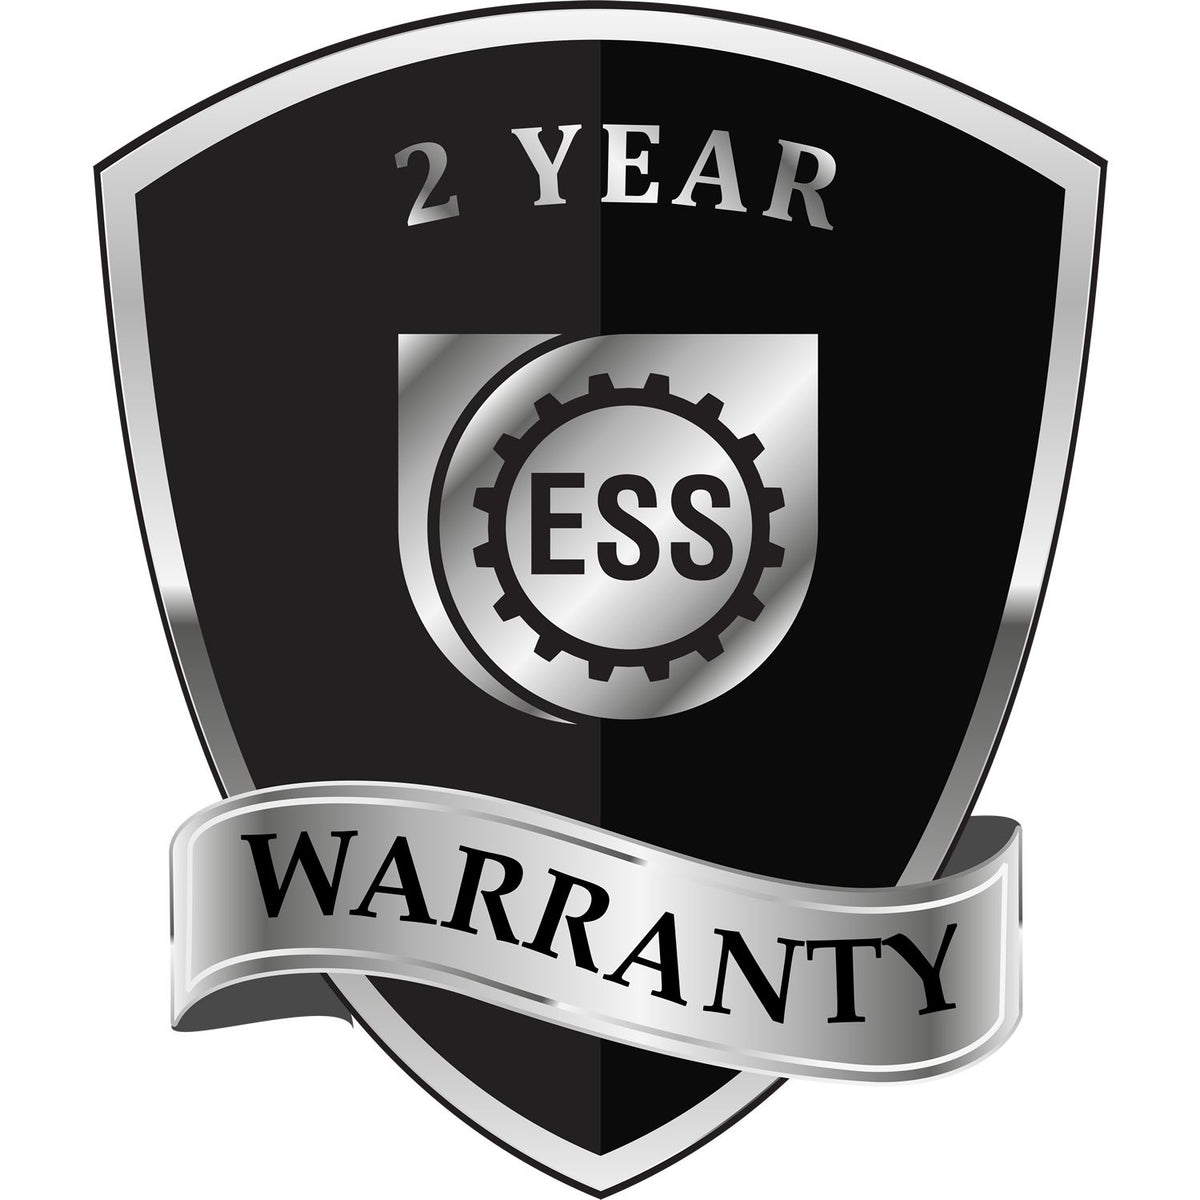 A badge or emblem showing a warranty icon for the Arizona Desk Architect Embossing Seal